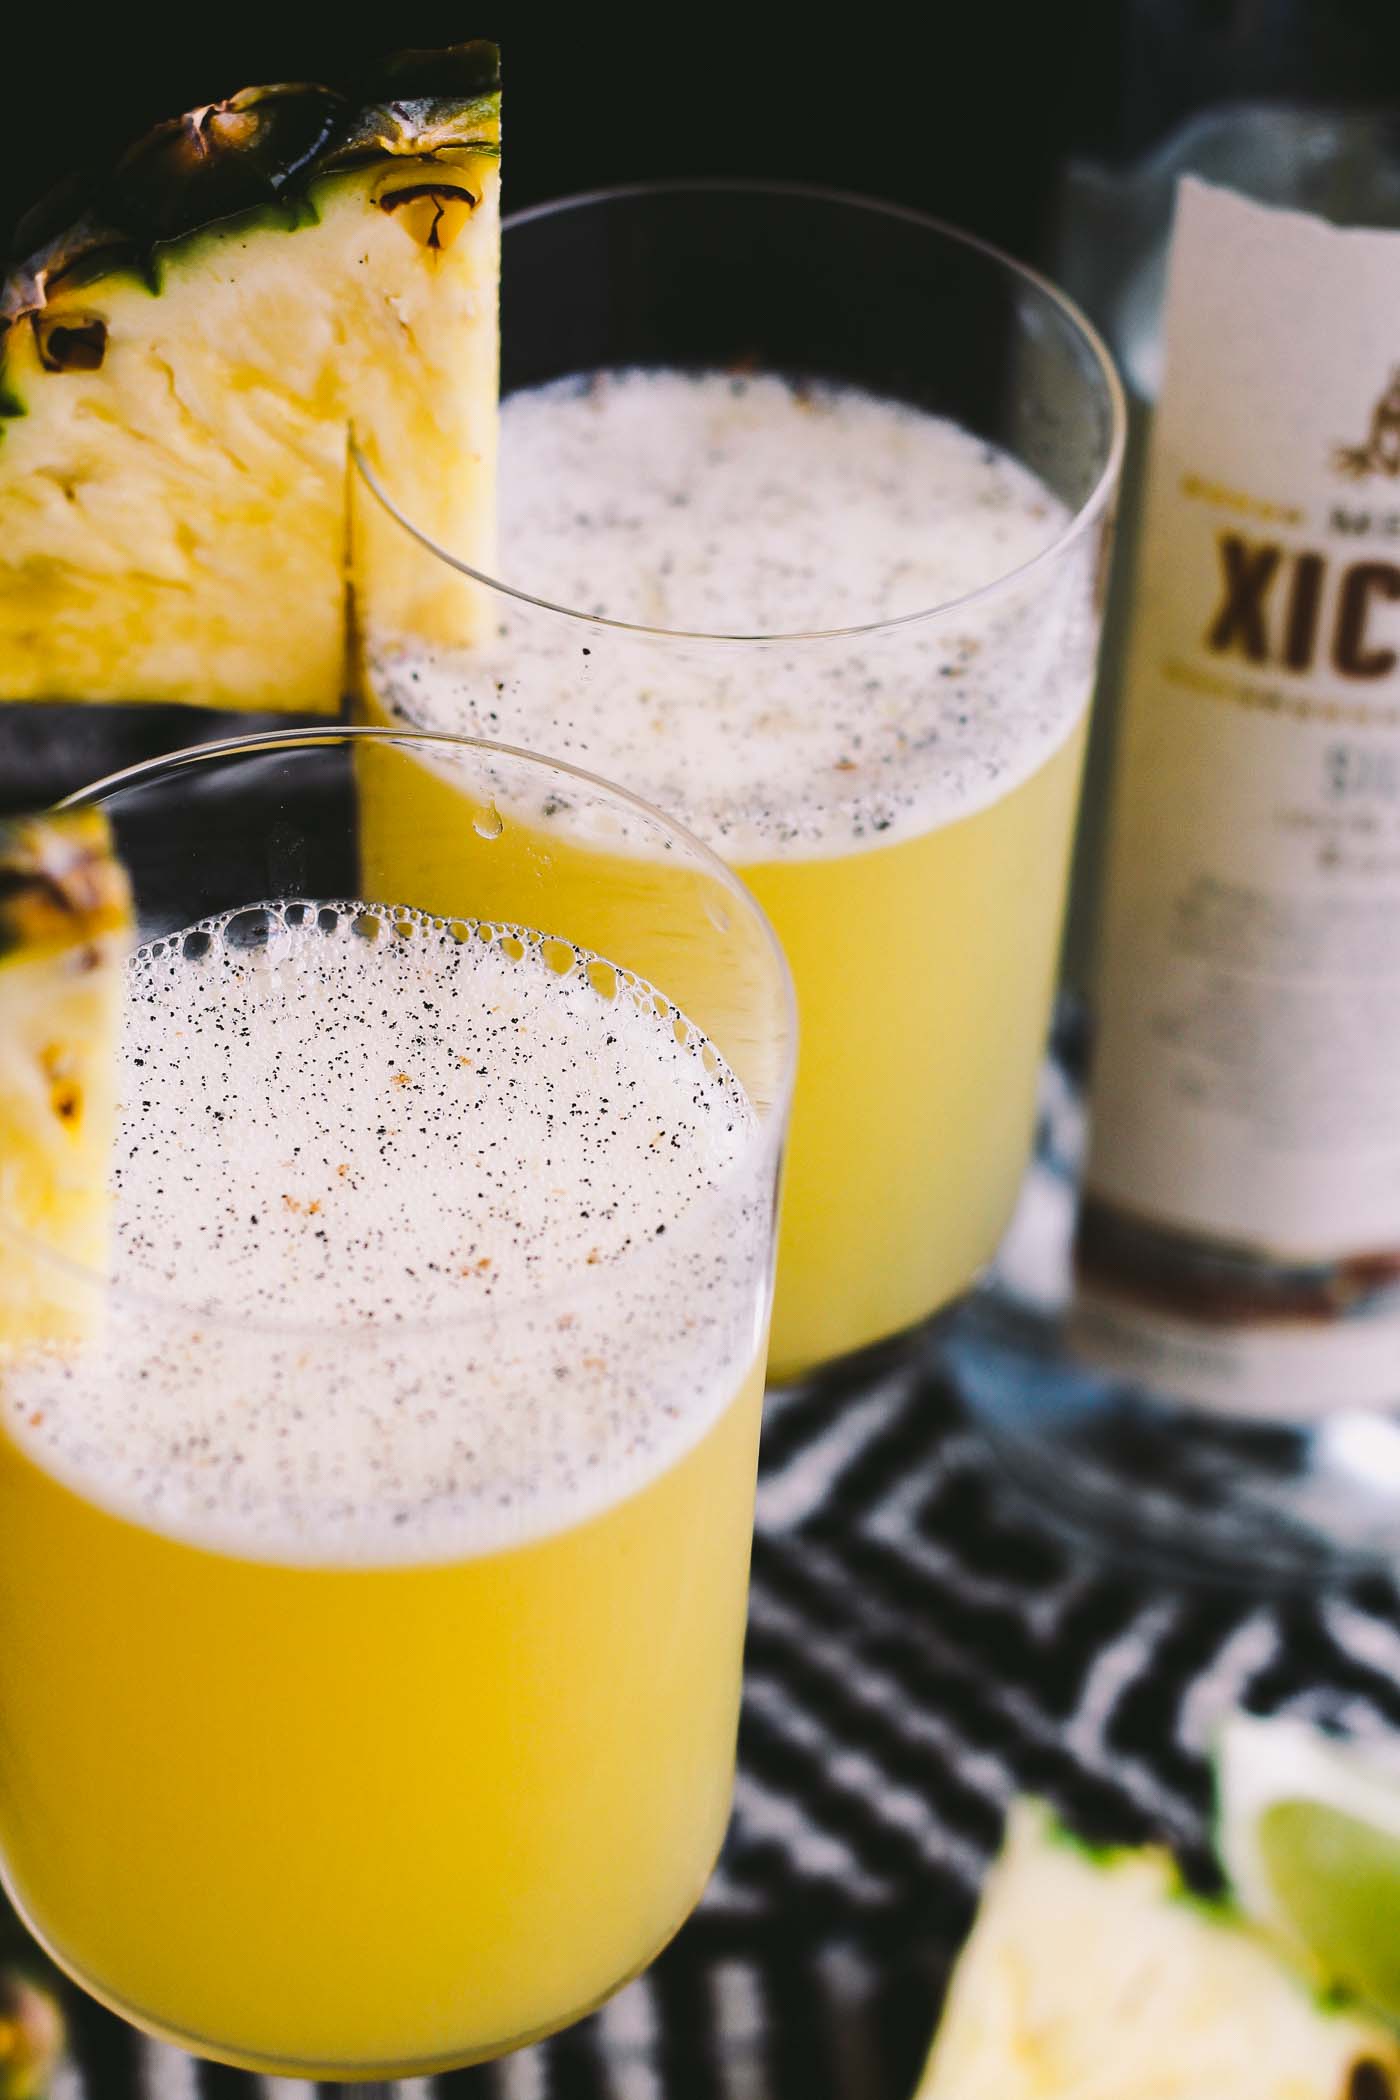 smoky pineapple mezcal margaritas with vanilla bean are the perfect fun cocktail to celebrate cinco de mayo! the smoke & bite of good mezcal is balanced with the natural sweetness of pineapple juice & vanilla bean. | cinco de mayo party, margarita recipe, mezcal, easy cocktail recipe, cocktail, summer drink, party drink |